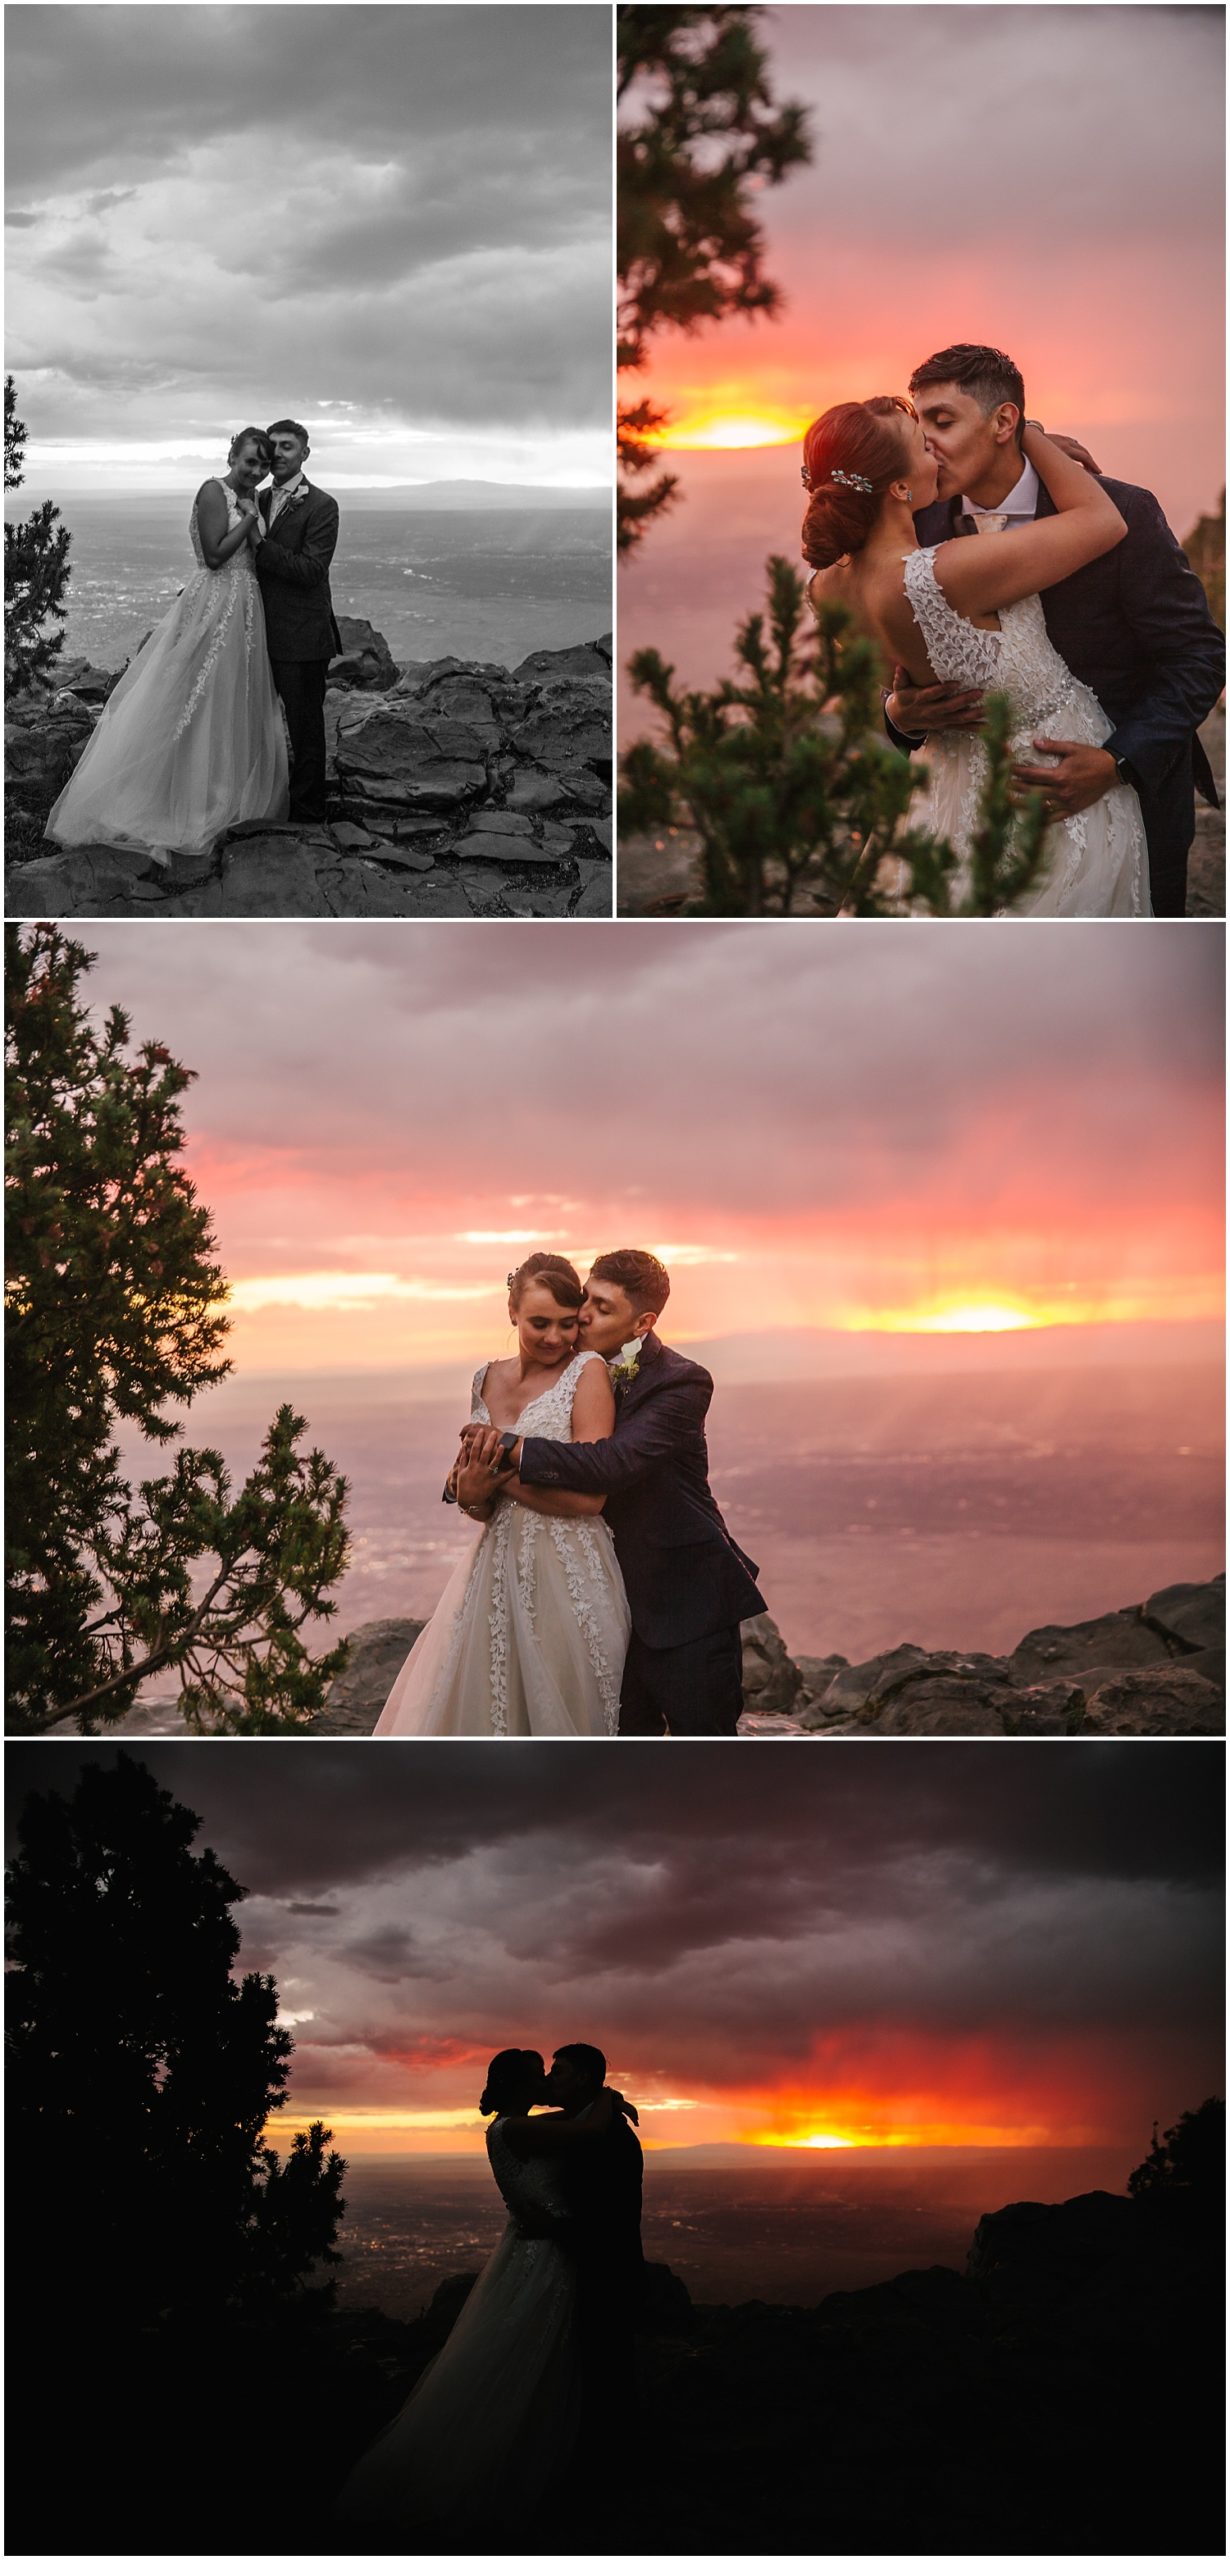 Bride and groom embrace during dramatic sunset at Sandia Crest